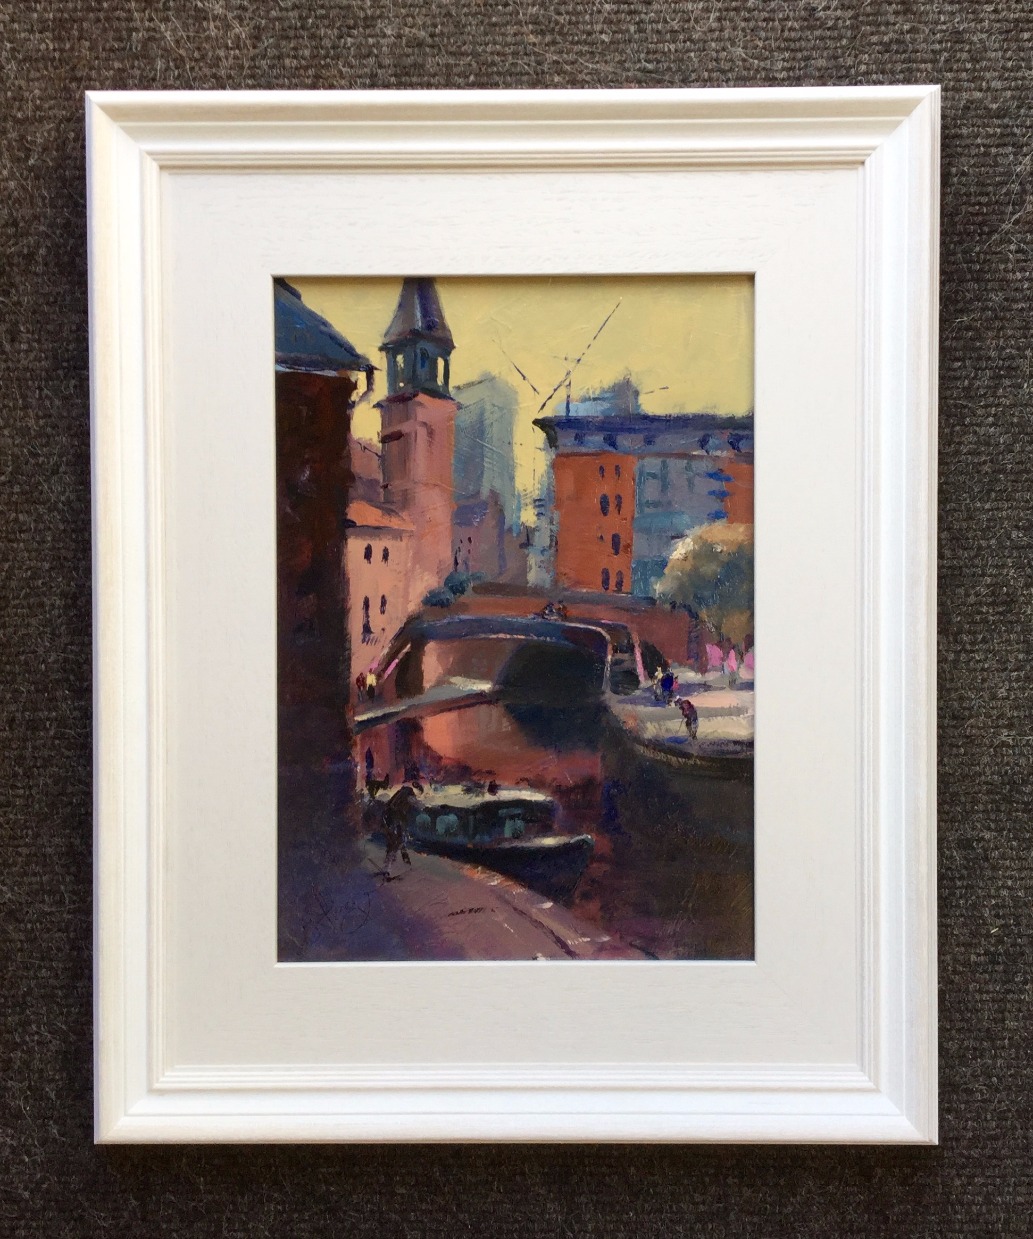 Castlefield by Trevor Lingard, Northern | Water | Manchester | Local